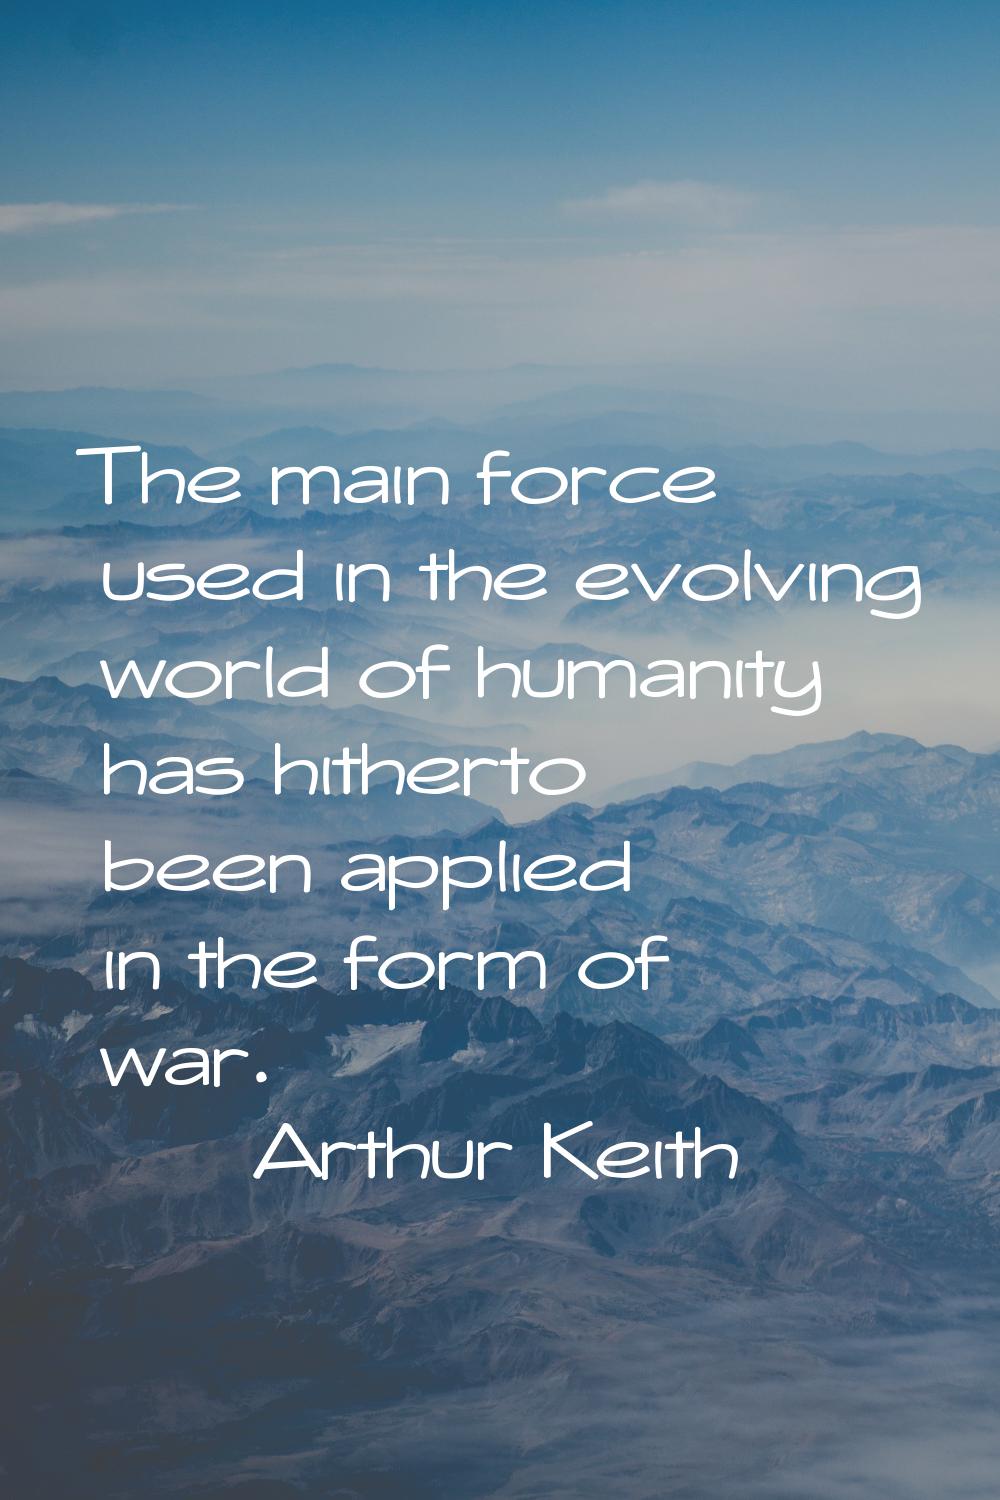 The main force used in the evolving world of humanity has hitherto been applied in the form of war.